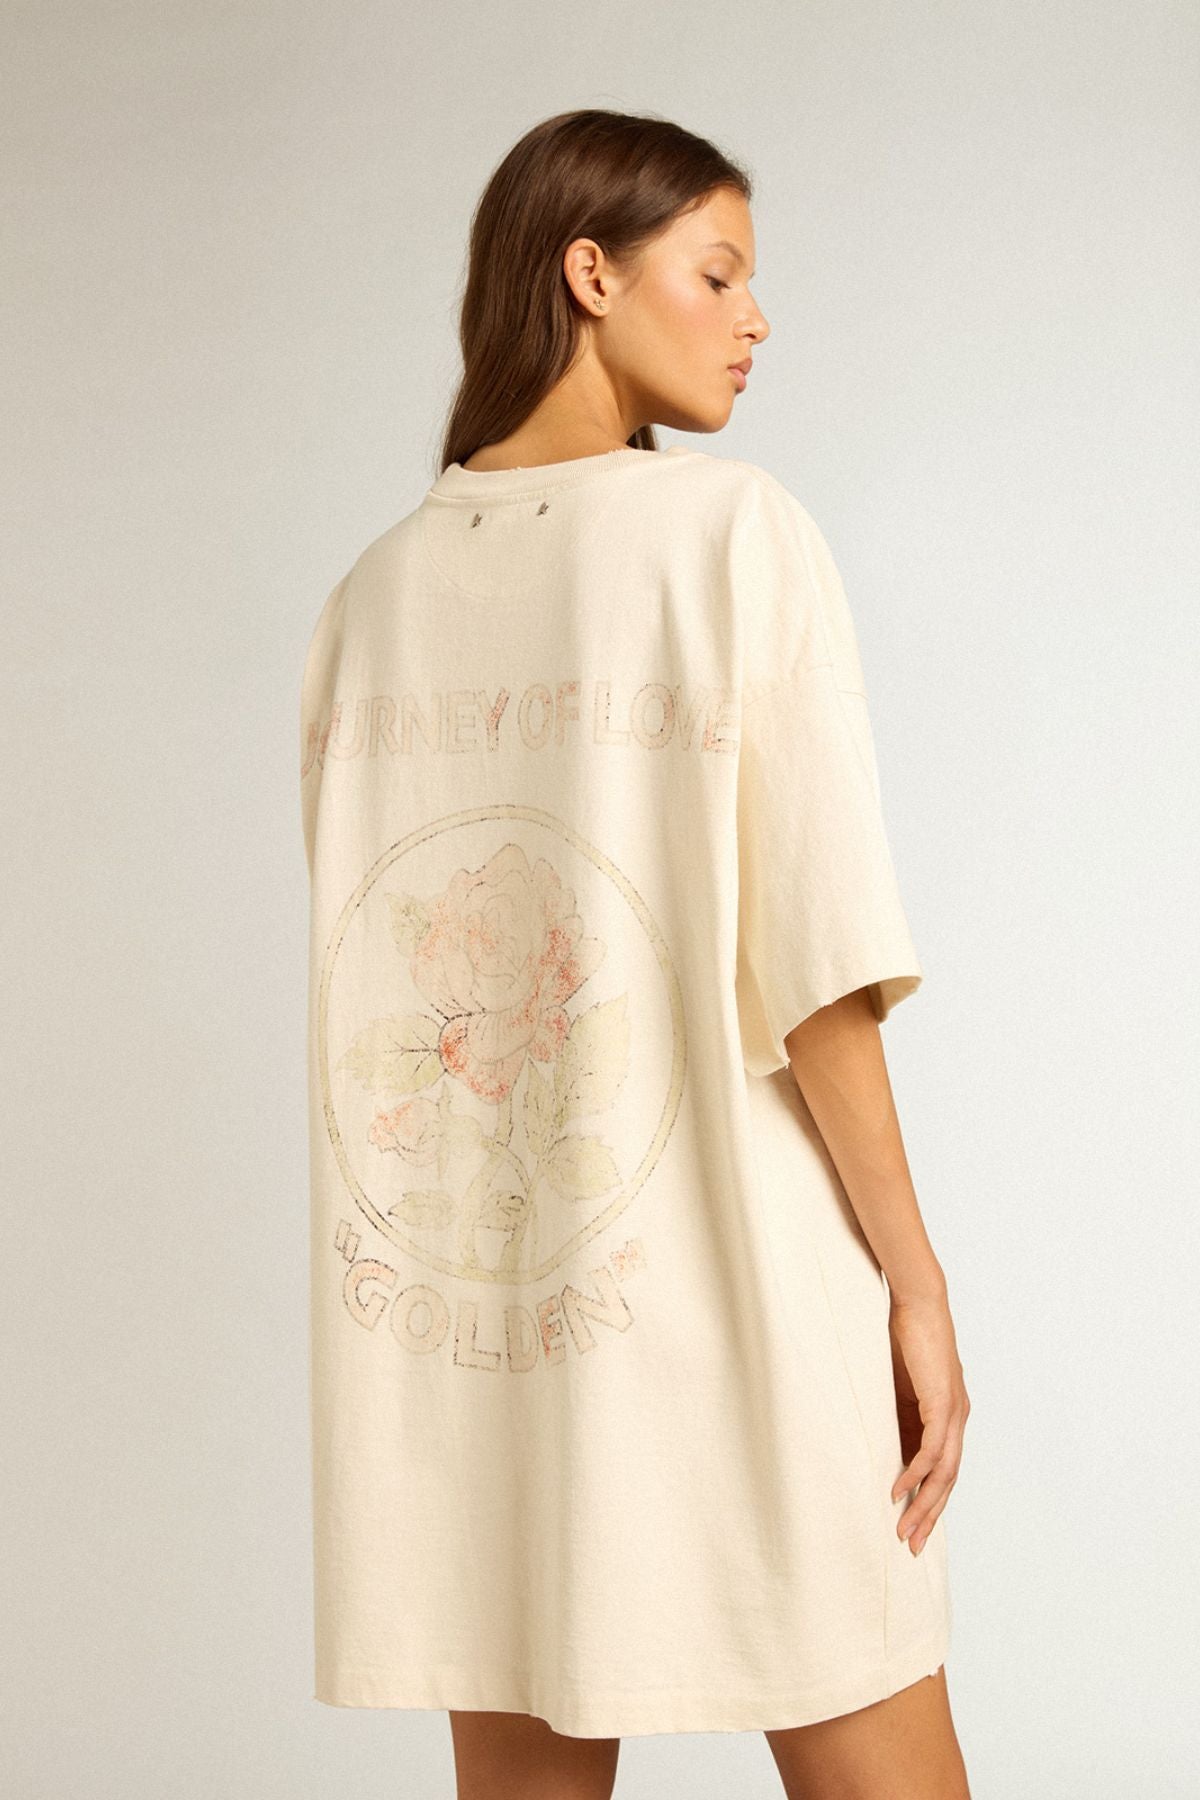 Golden Goose Journey of Love Embroidered T-Shirt Dress - Heritage White/ Multicolour